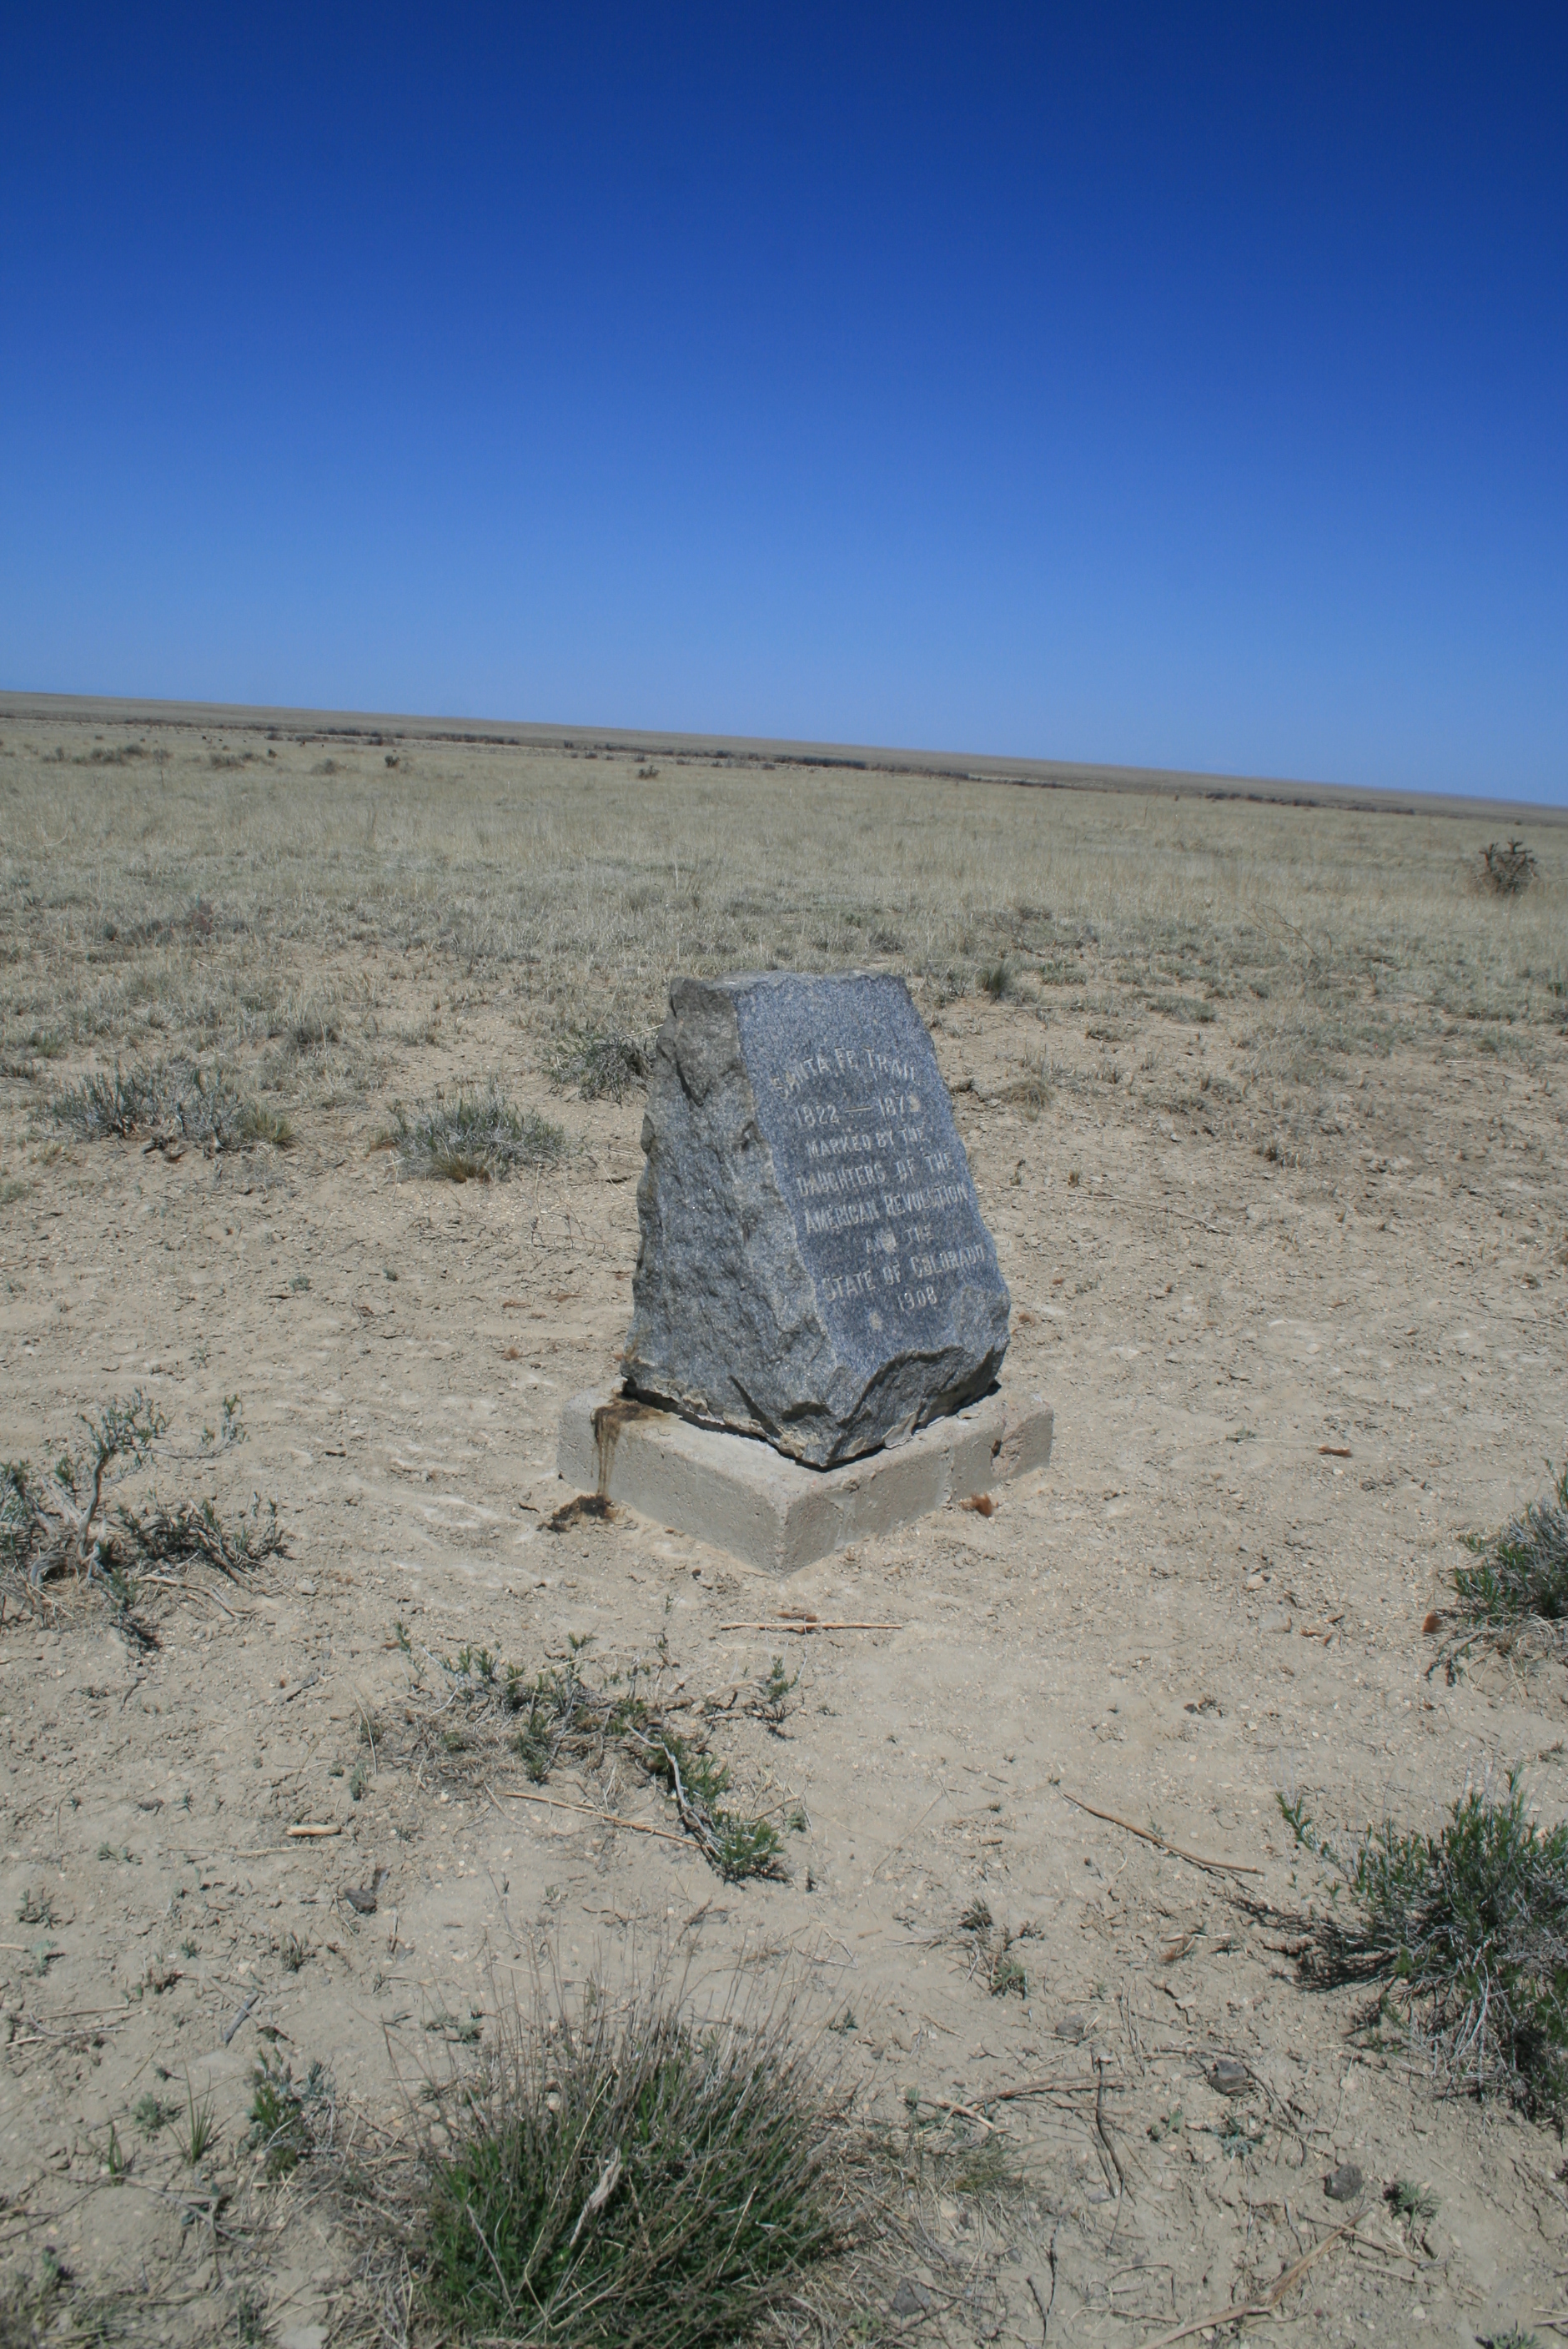 A marker on the dry prairie in LaJunta, CO shows livestock impacts